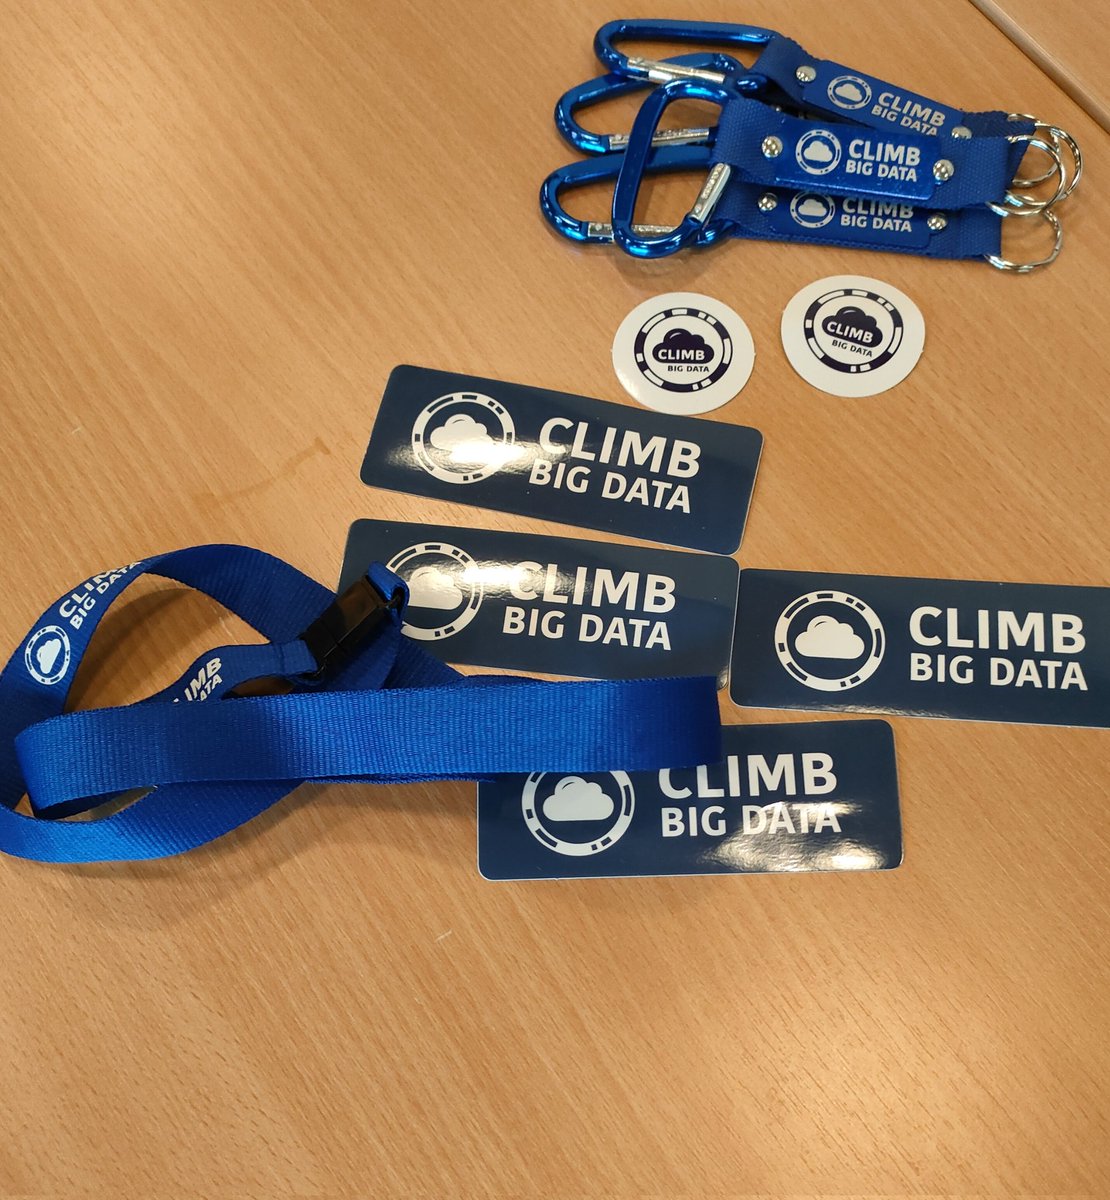 @MRCClimb stickers in room 101 of @LibraryofBham